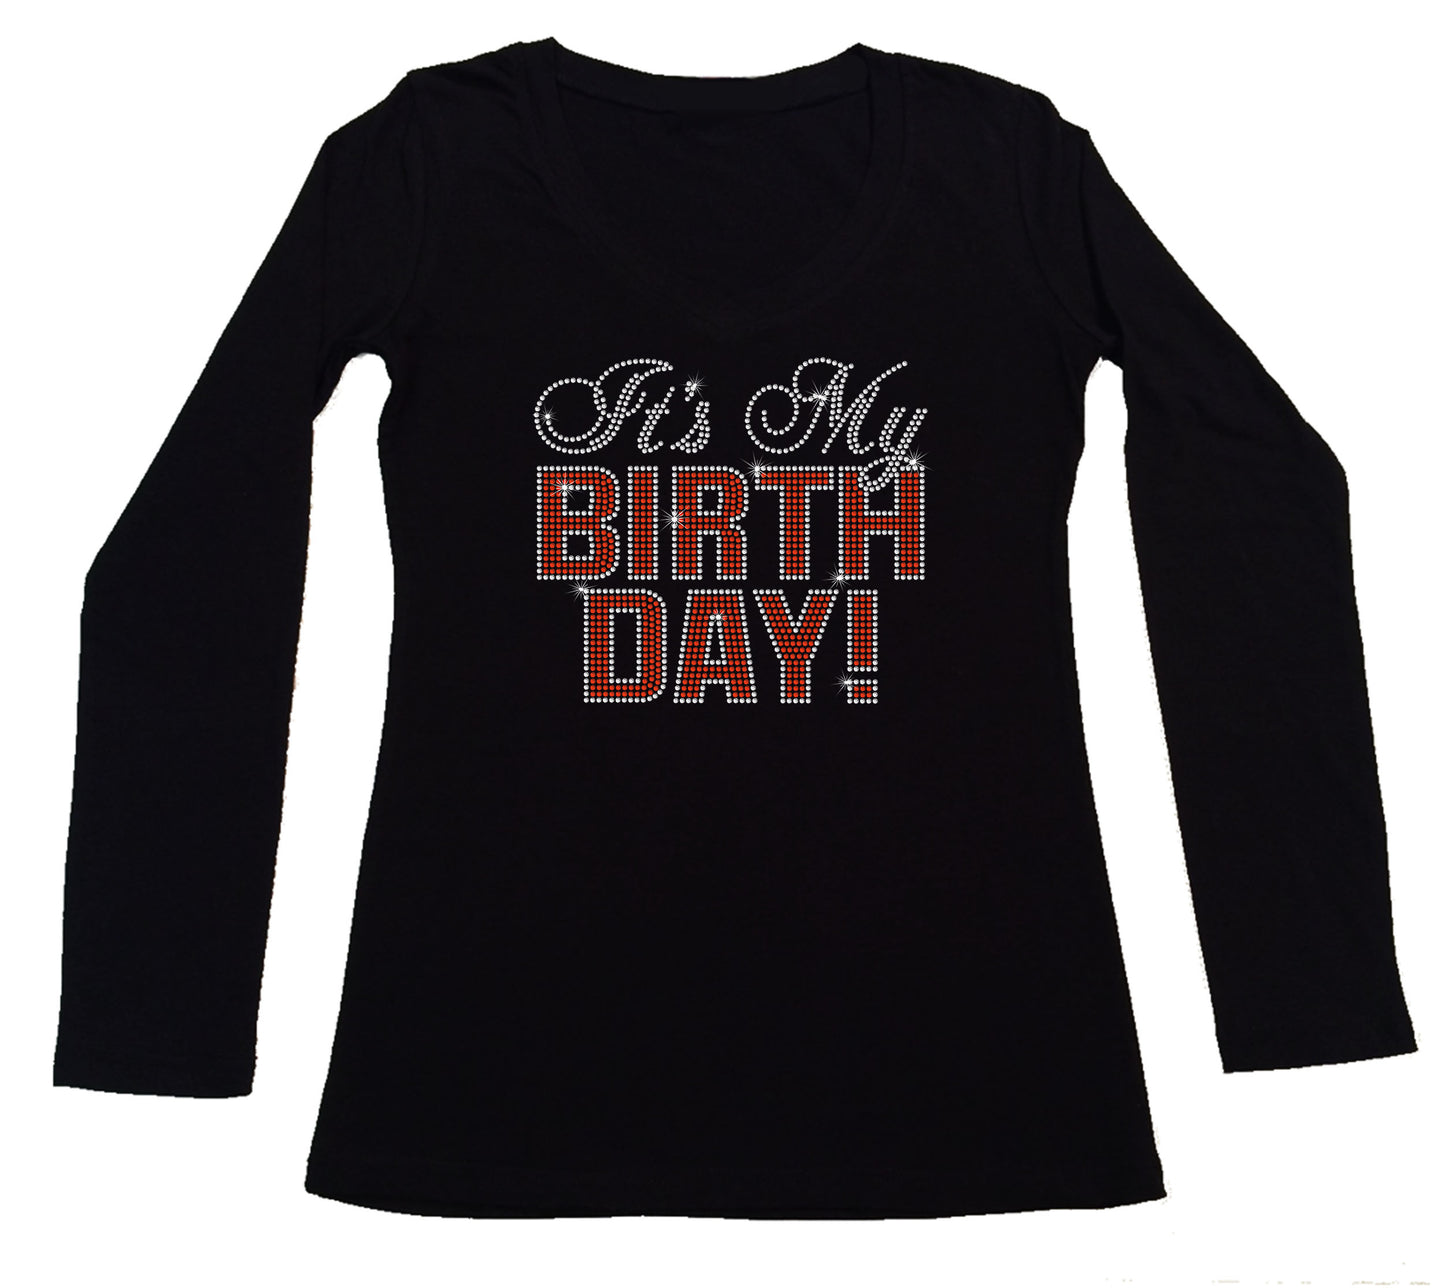 Women's Rhinestone Fitted Tight Snug Shirt It's My Birthday in Bold Letters